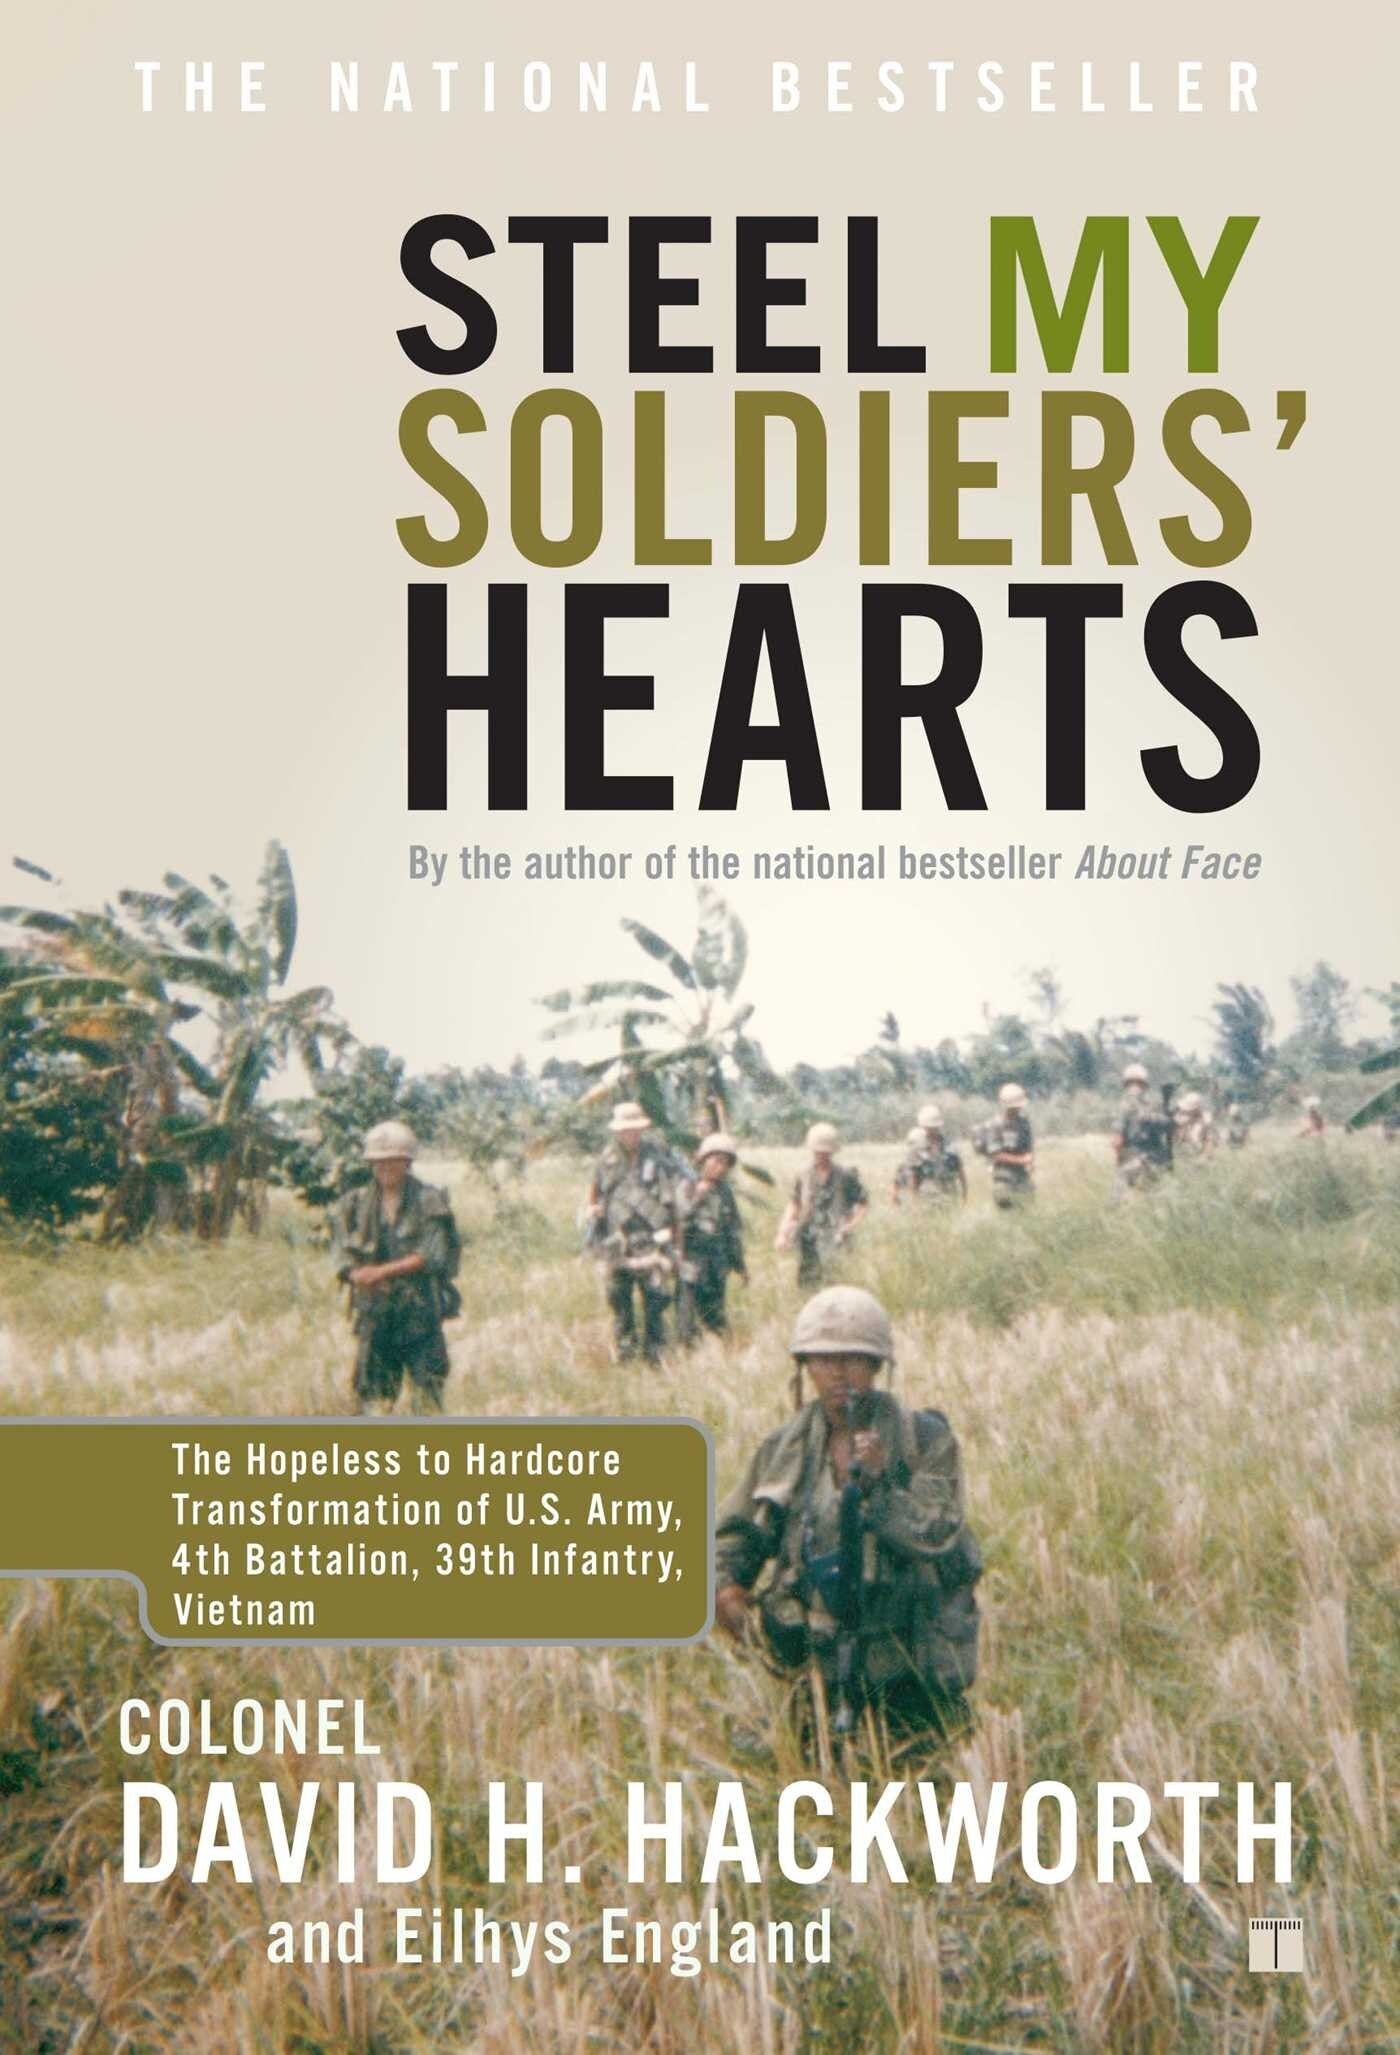 Steel My Soldiers' Hearts: The Hopeless to Hardcore Transformation of U.S. Army, 4th Battalion, 39th Infantry, Vietnam - Hackworth, David H. (Paperback)-History - Military / War-9780743246132-BookBizCanada